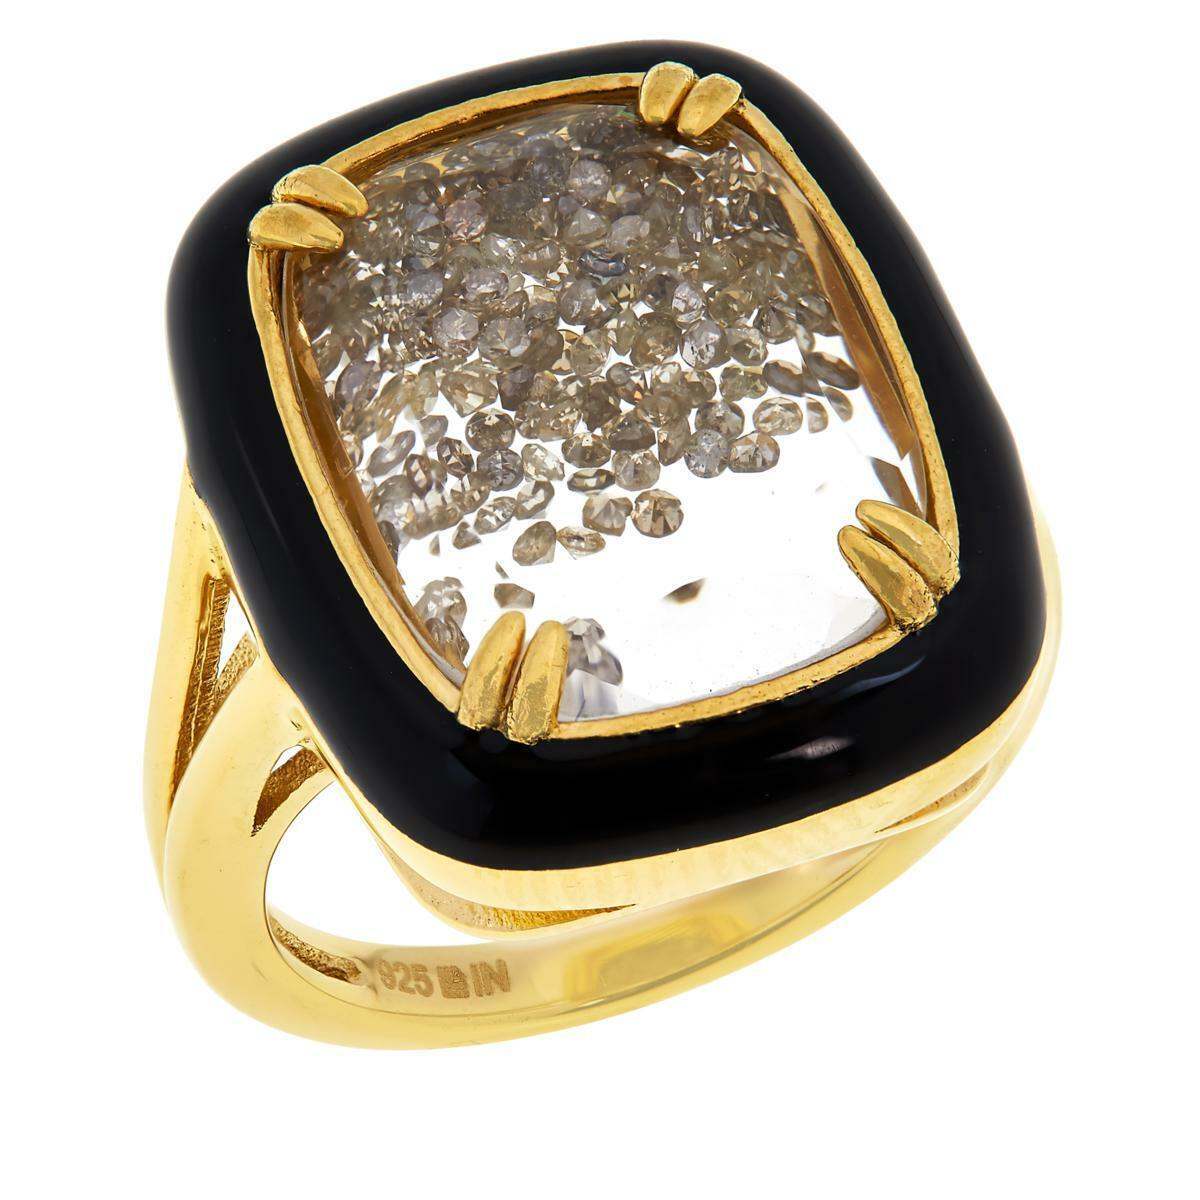 Colleen Lopez Gold-Plated Colored Diamond Shaker Ring, Size 5